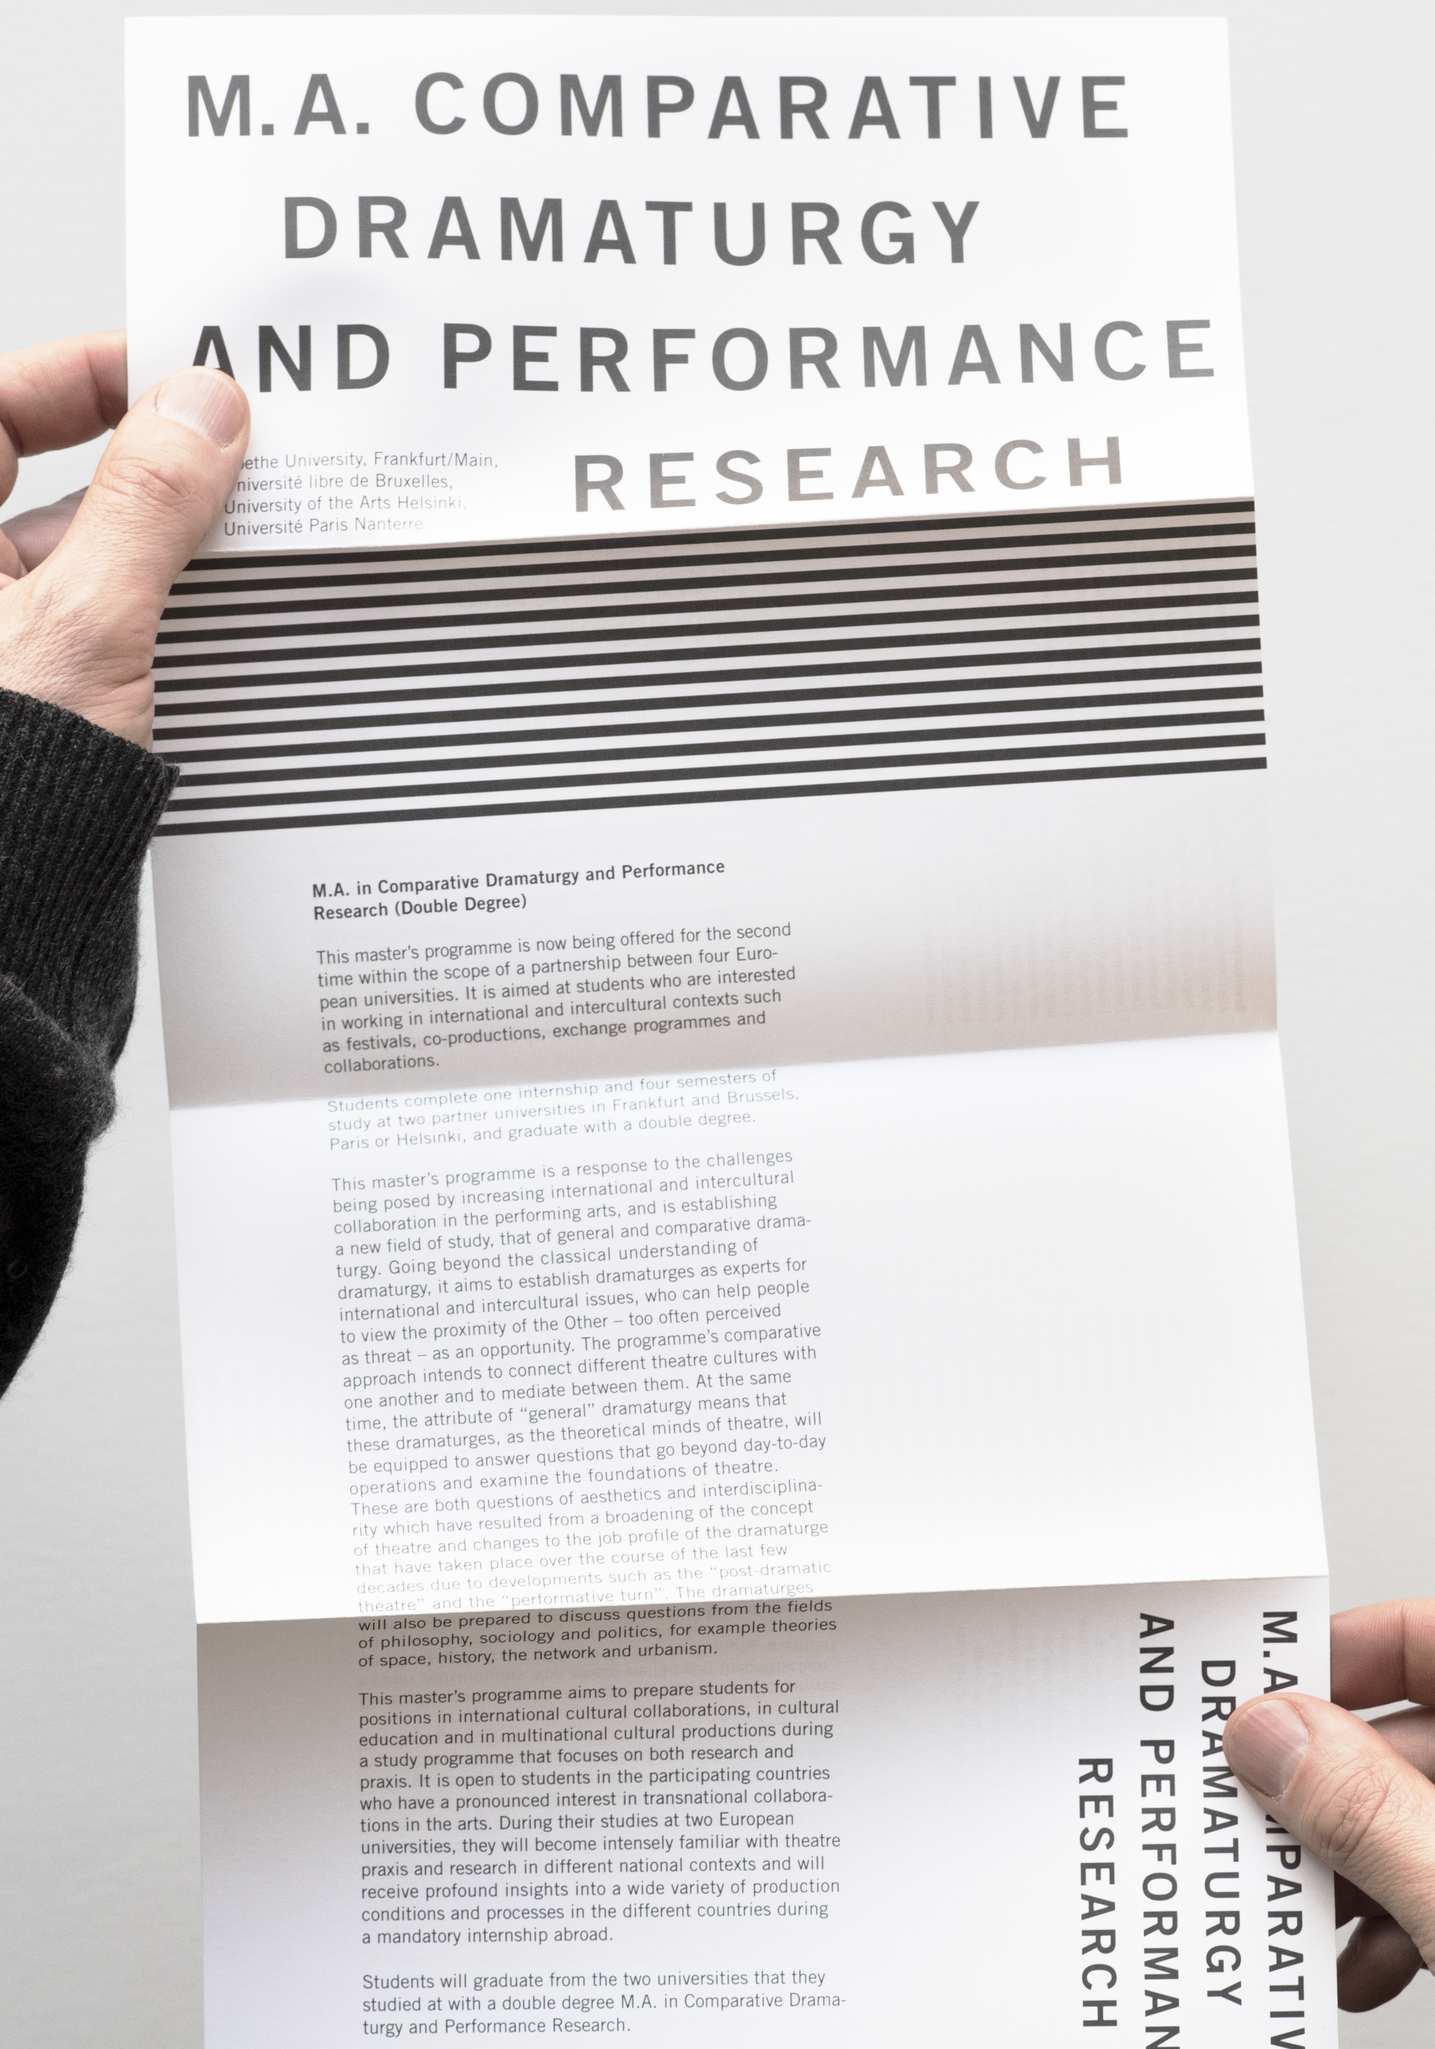 ma-comparative-dramaturgy-and-performance-research-flyer-3-1435x2049px